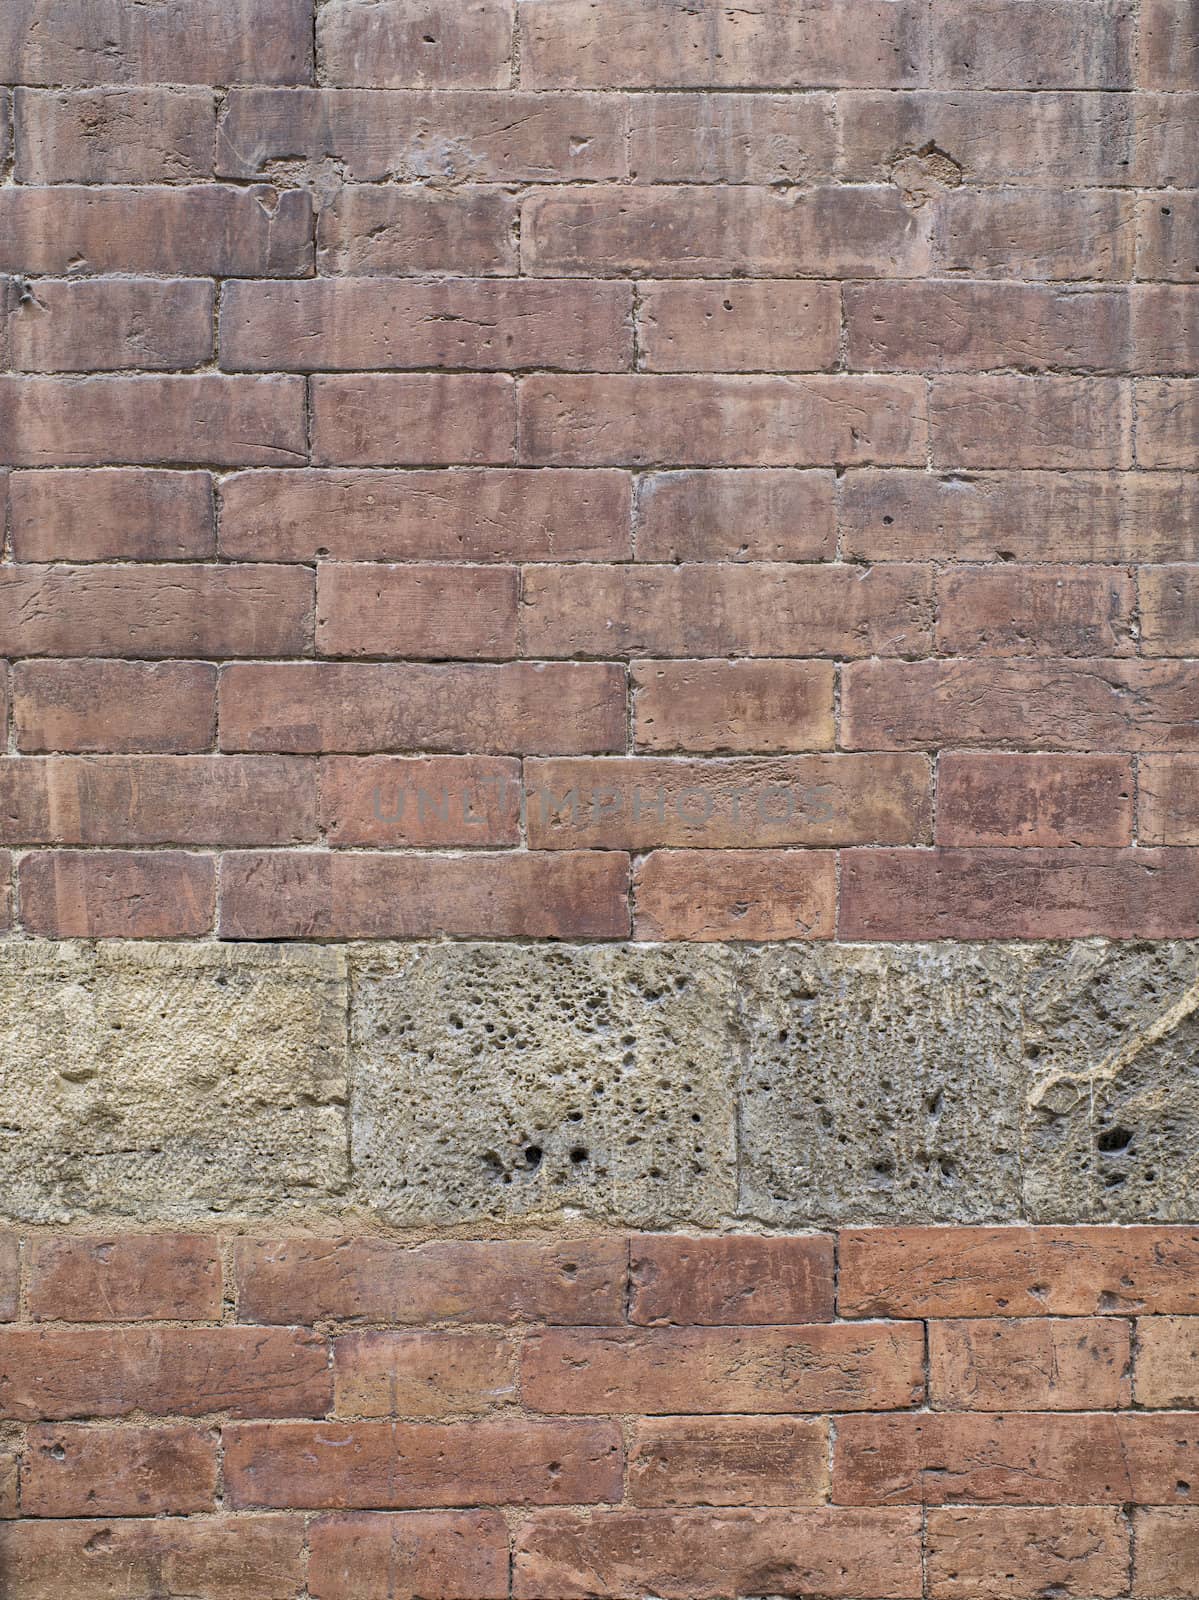 Detailed shot of a brick wall in a vertical image.